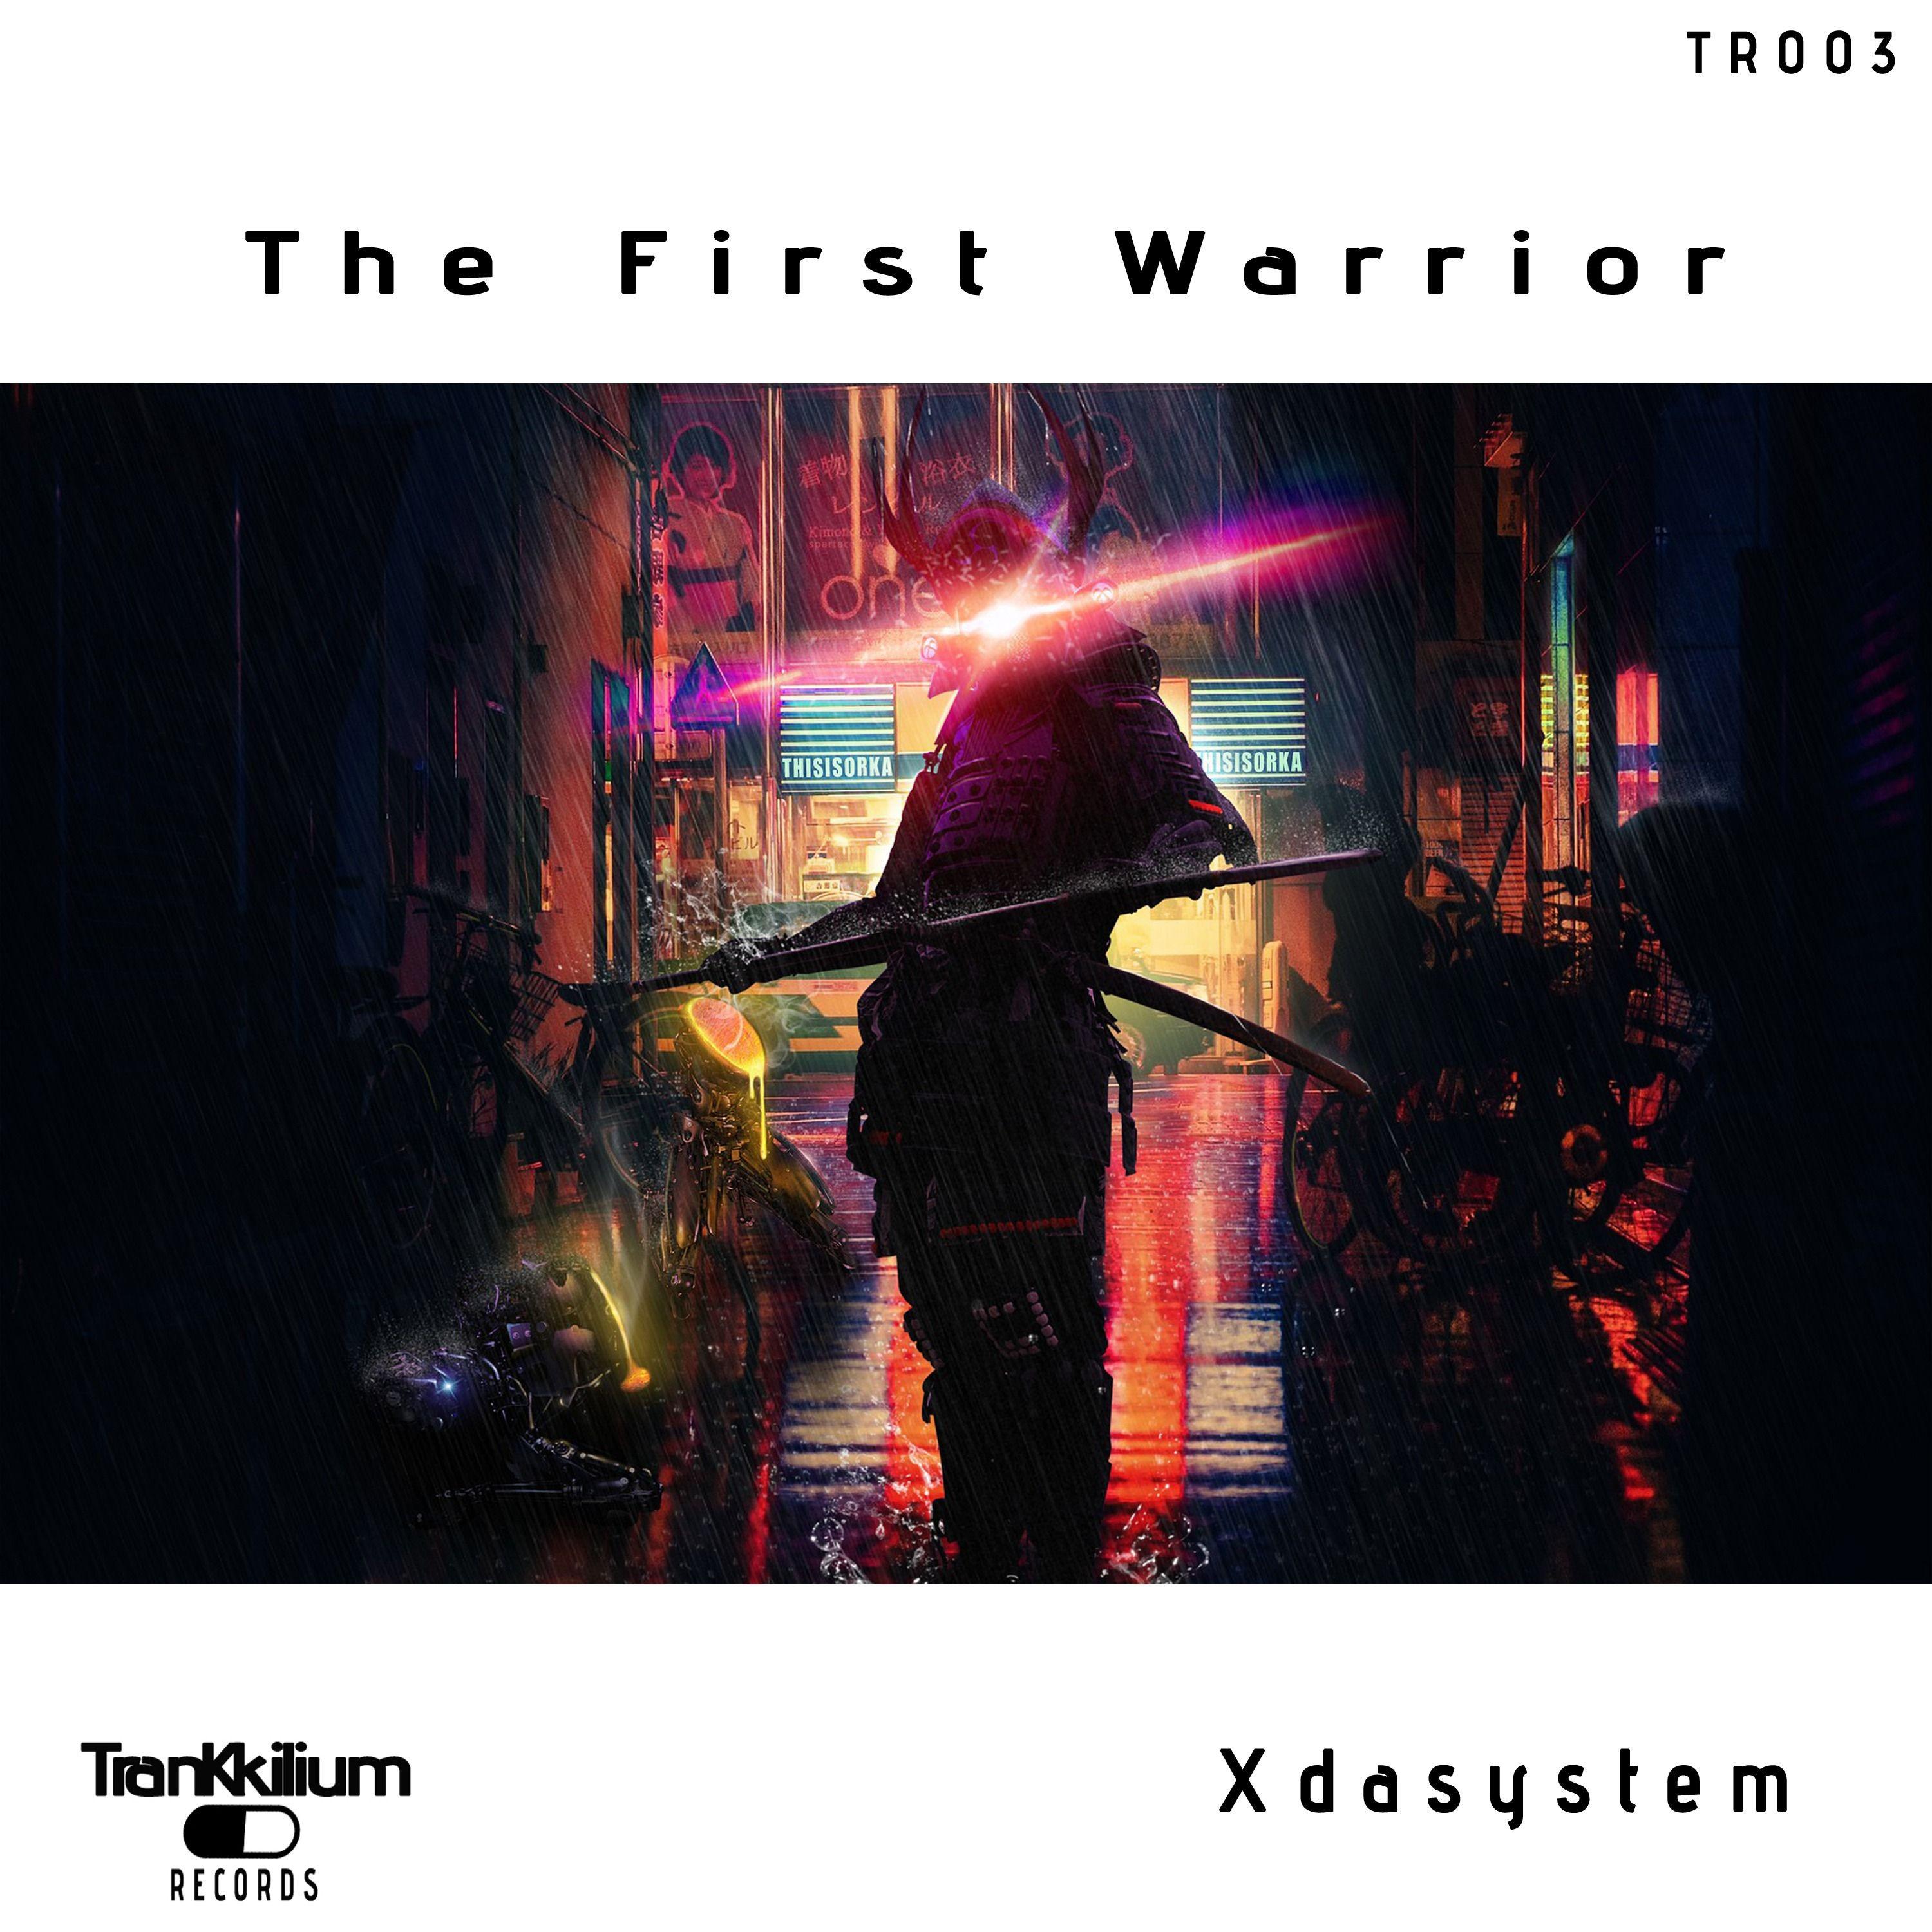 Feelings of the Past (Original Mix)歌词 歌手Xdasystem-专辑The First Warrior-单曲《Feelings of the Past (Original Mix)》LRC歌词下载